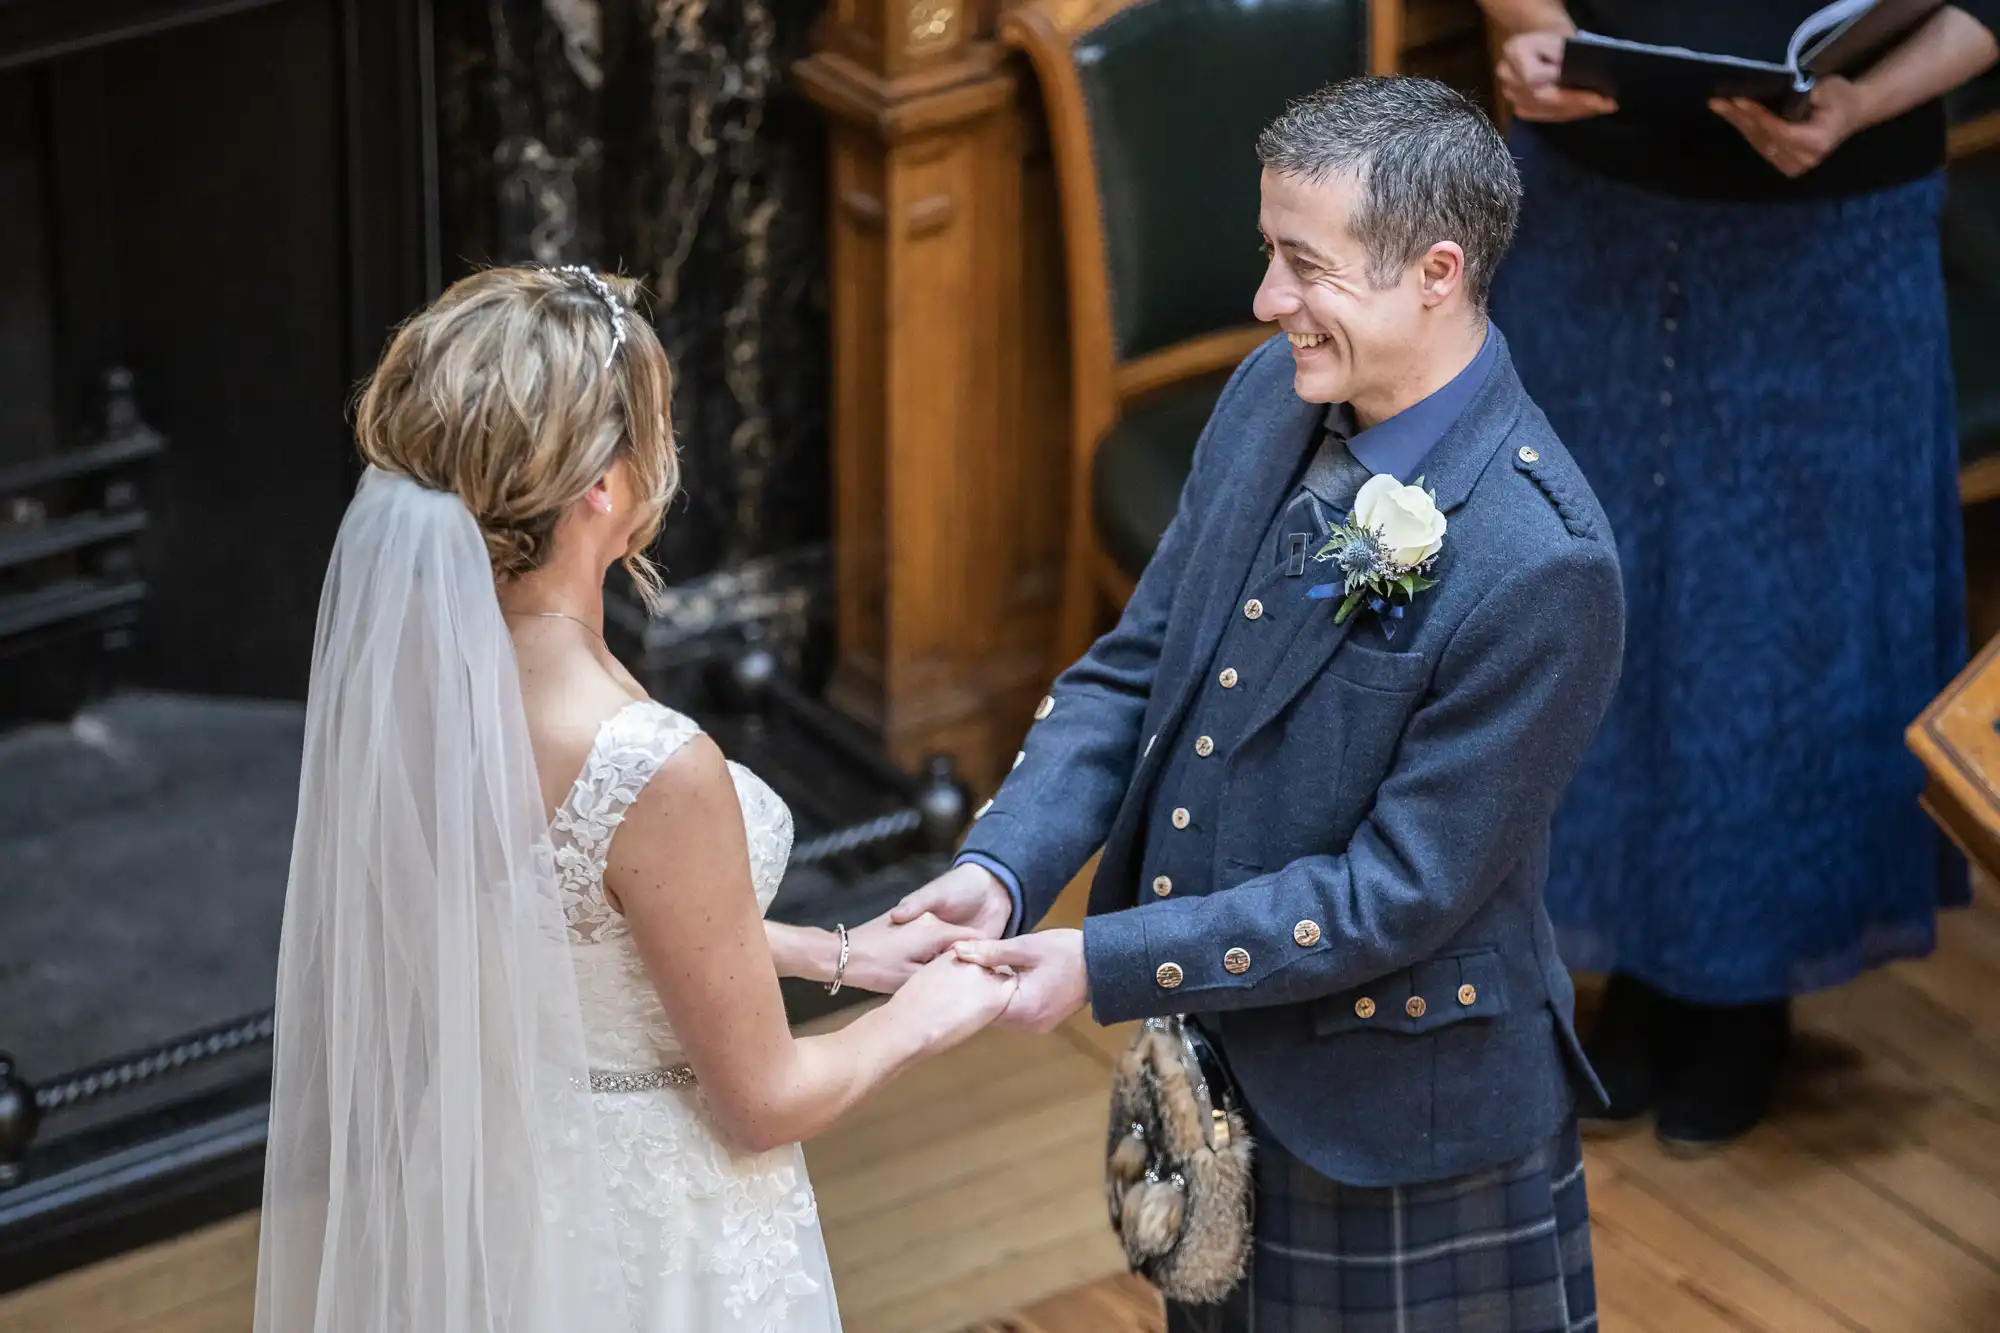 A bride and groom exchange vows and hold hands during their wedding ceremony. The groom wears a traditional Scottish kilt outfit, and the bride is in a white wedding dress with a veil.